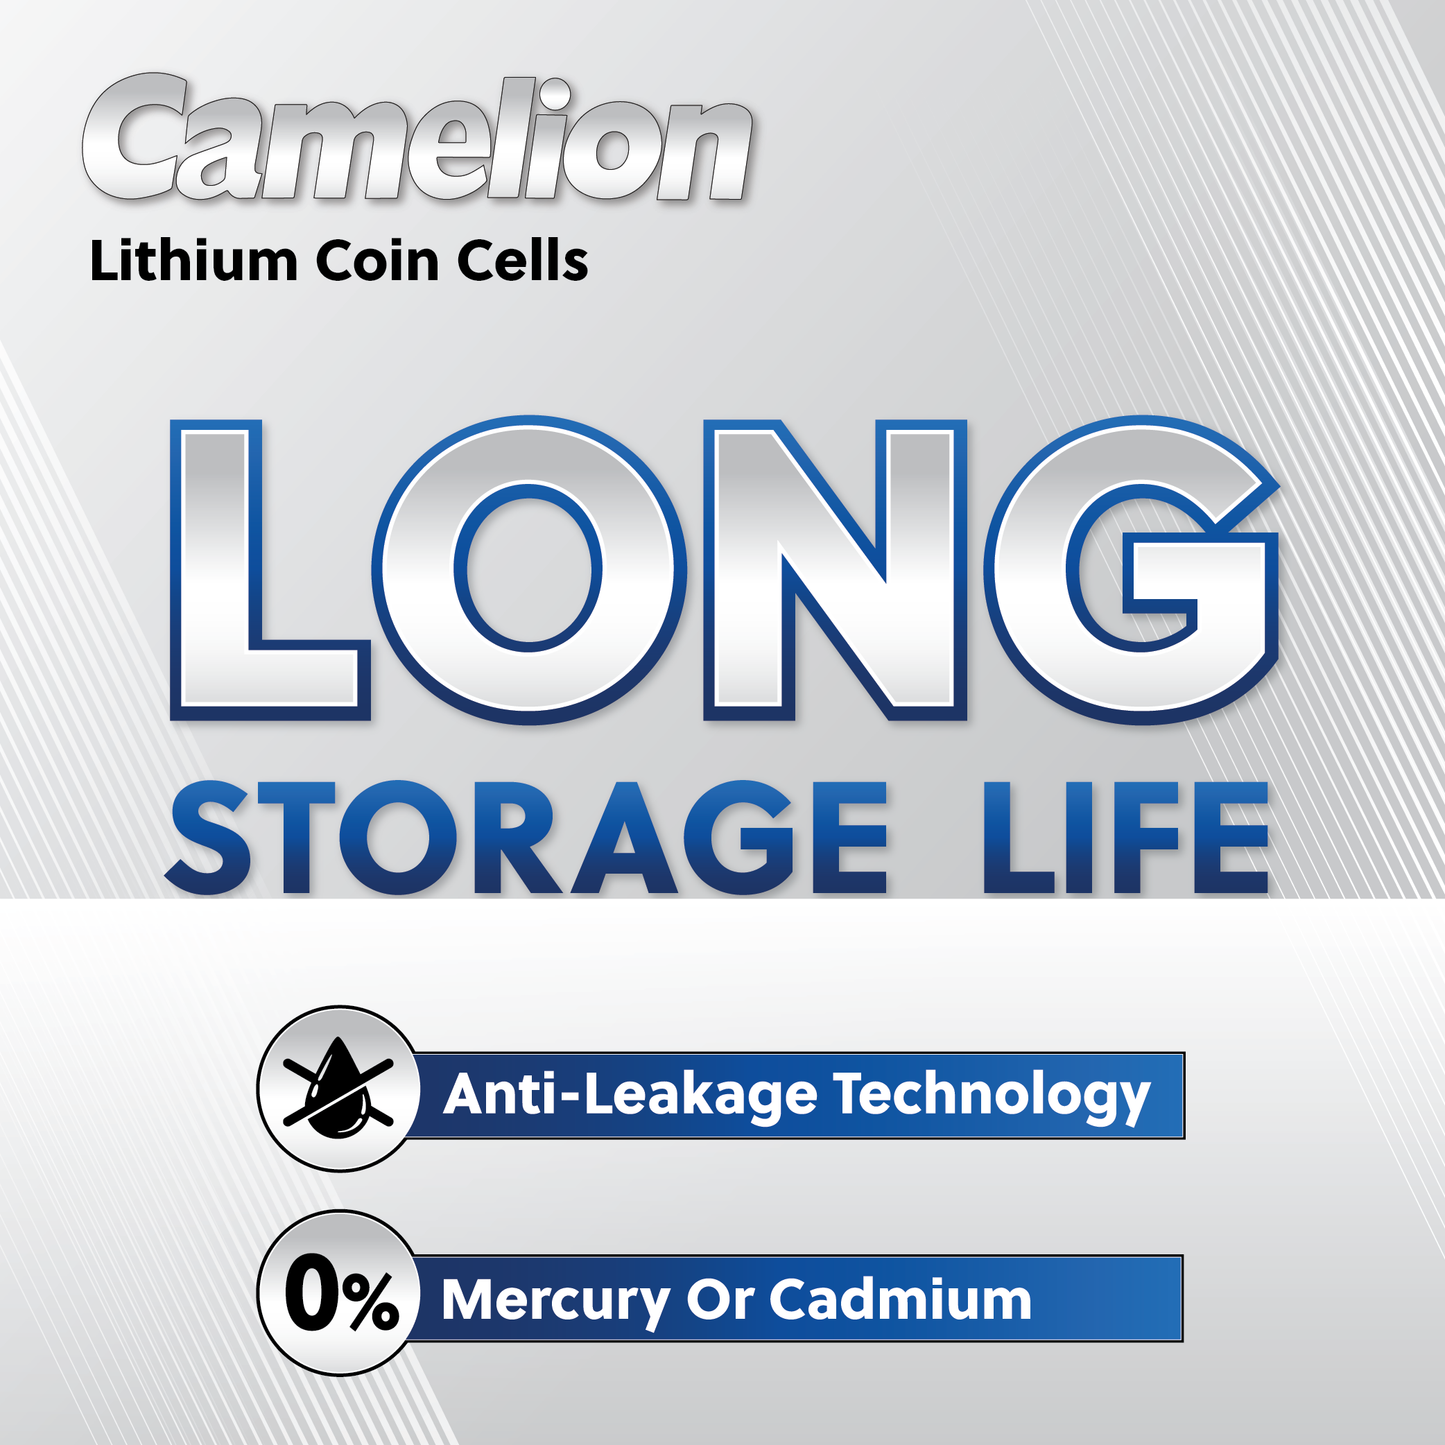 Camelion CR2025/ 2025 3V Lithium Coin Cell Battery